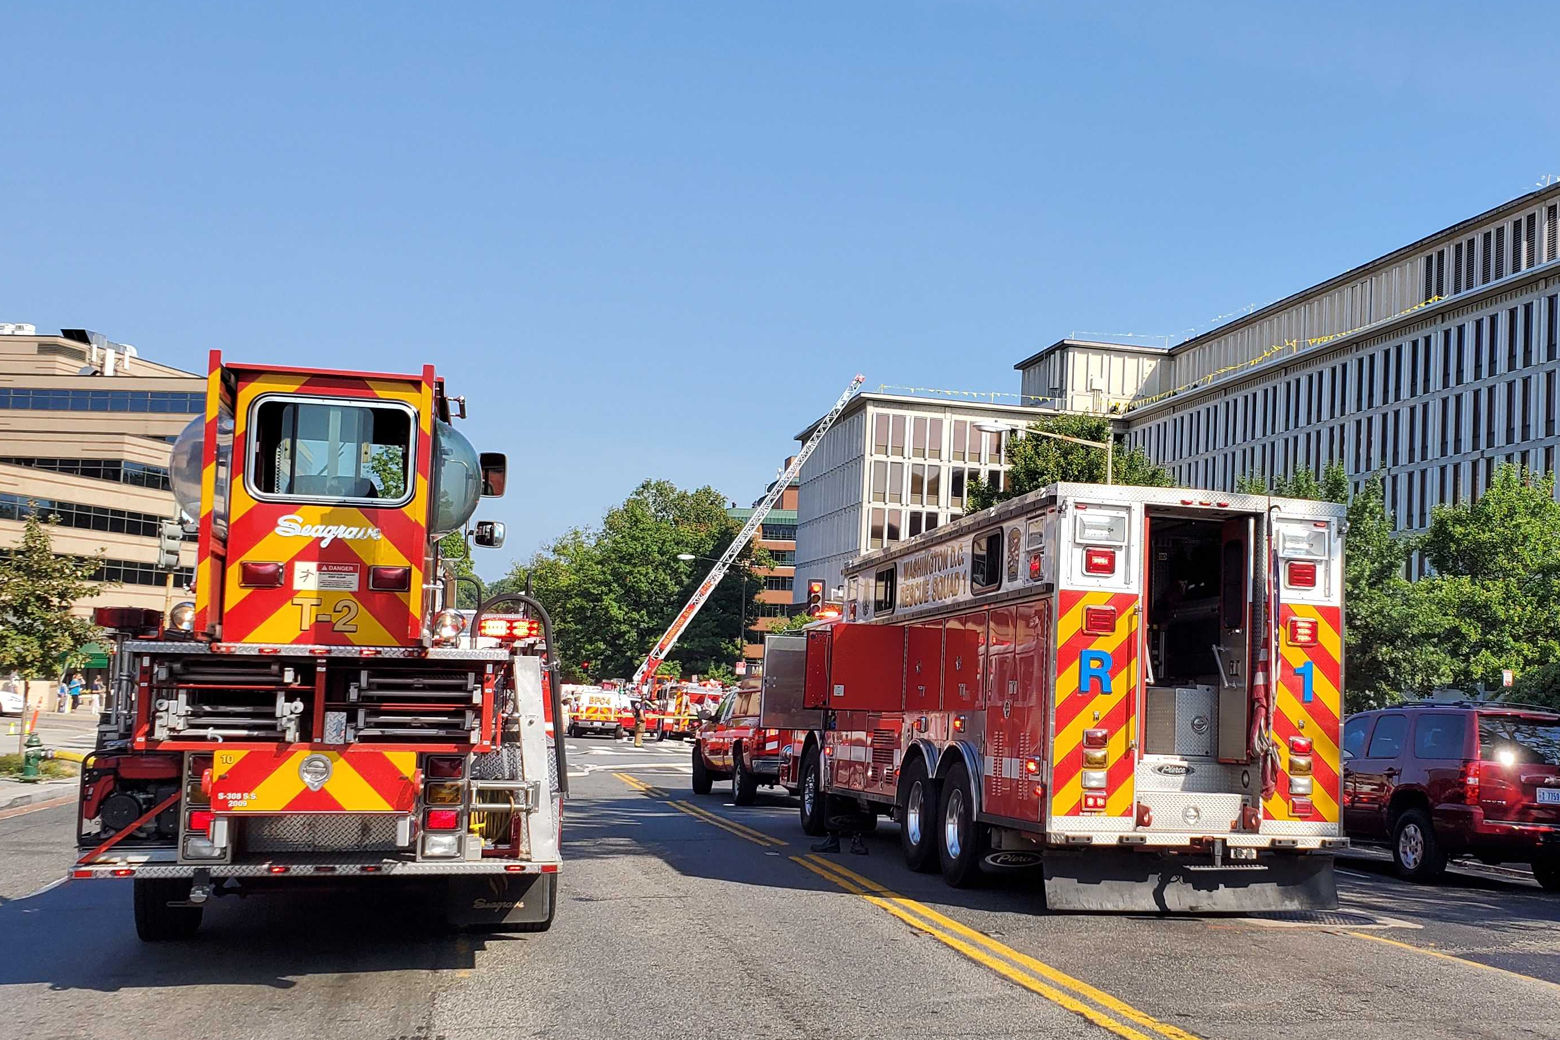 The large fire department response closed Connecticut Avenue between Yuma Street and Van Ness Street.